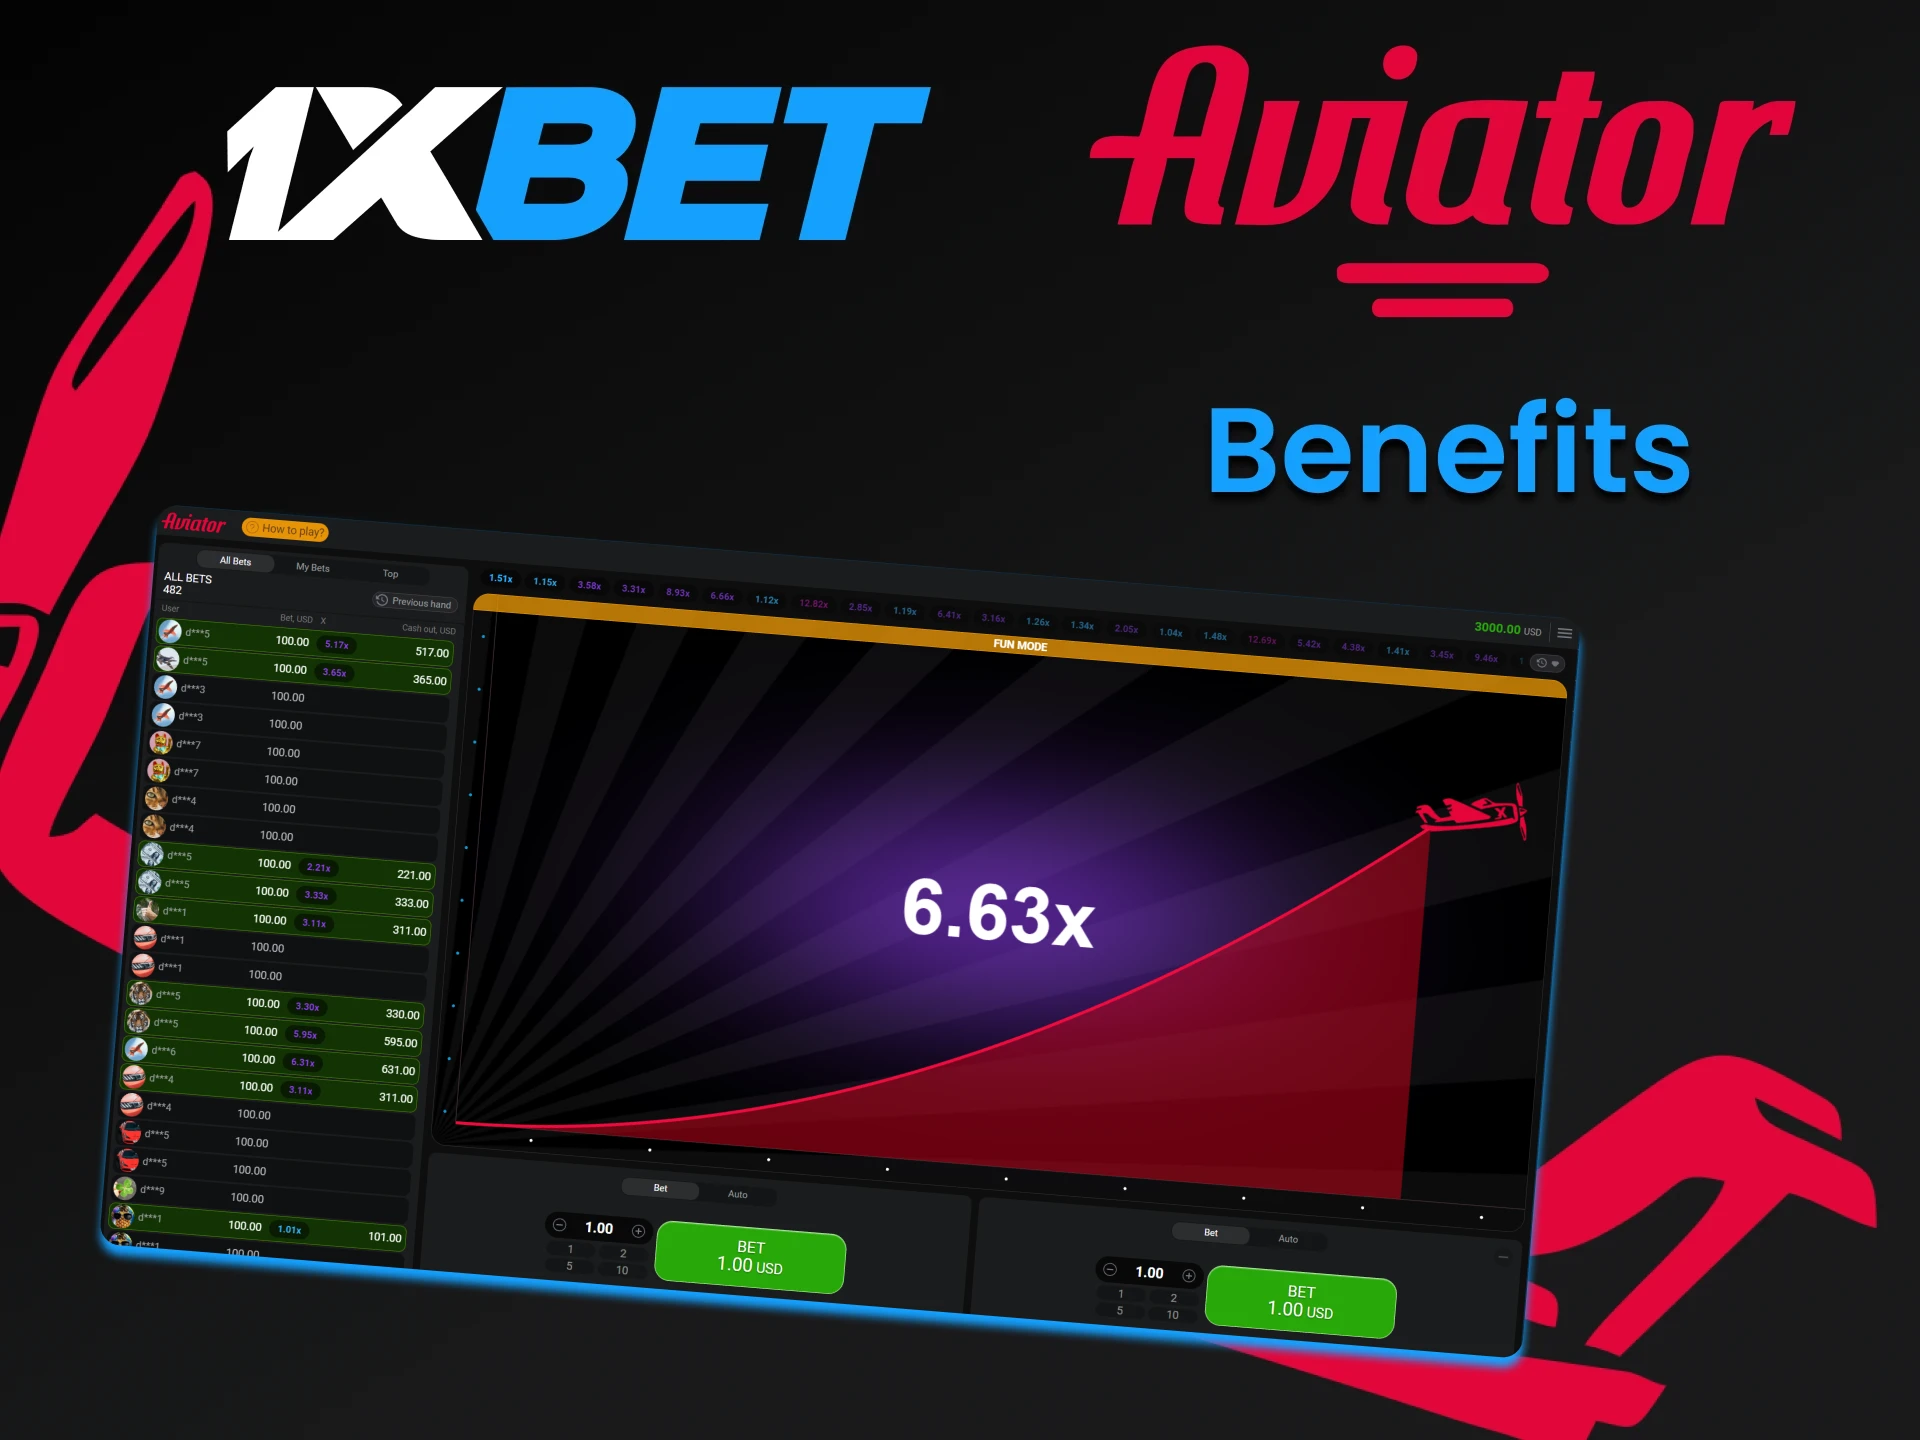 1xbet will pleasantly surprise you for playing Aviator.